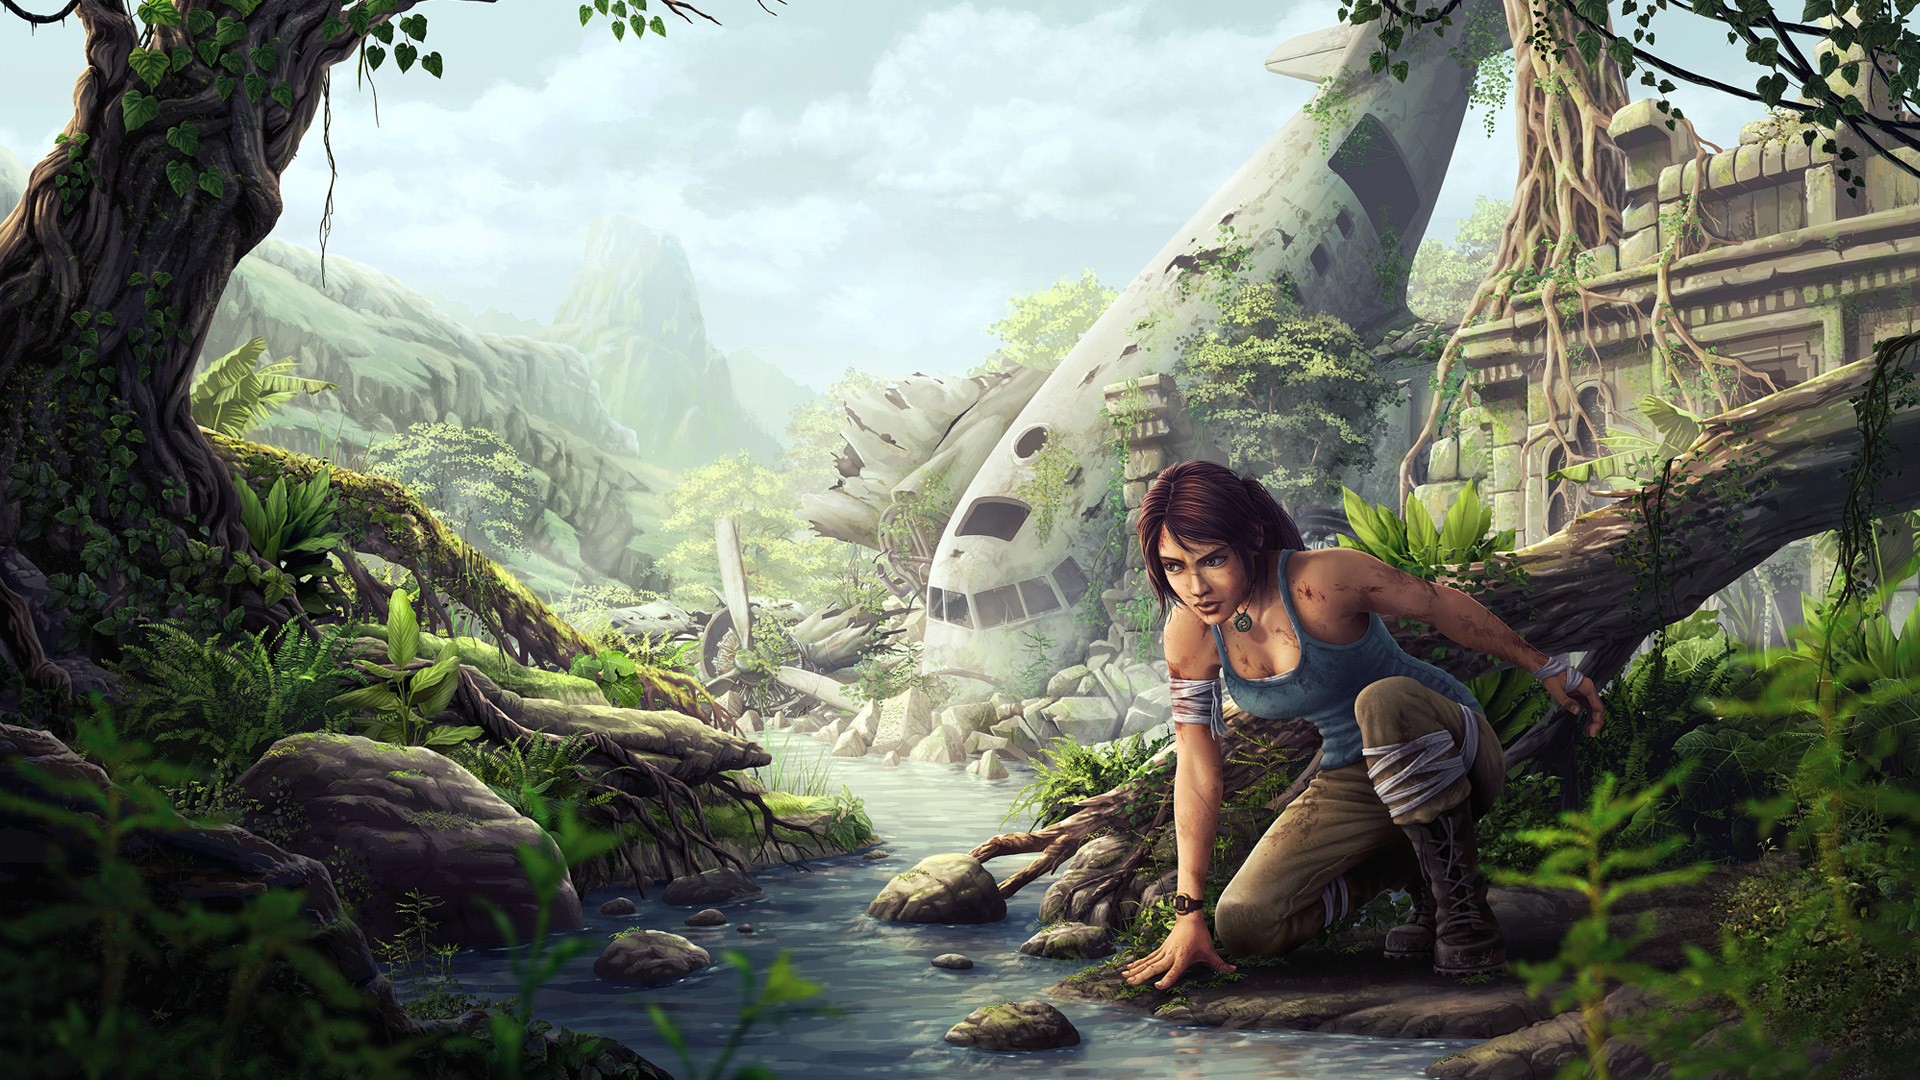 General 1920x1080 video games video game characters video game girls Tomb Raider fan art artwork video game art wreck aircraft necklace PC gaming Lara Croft (Tomb Raider)